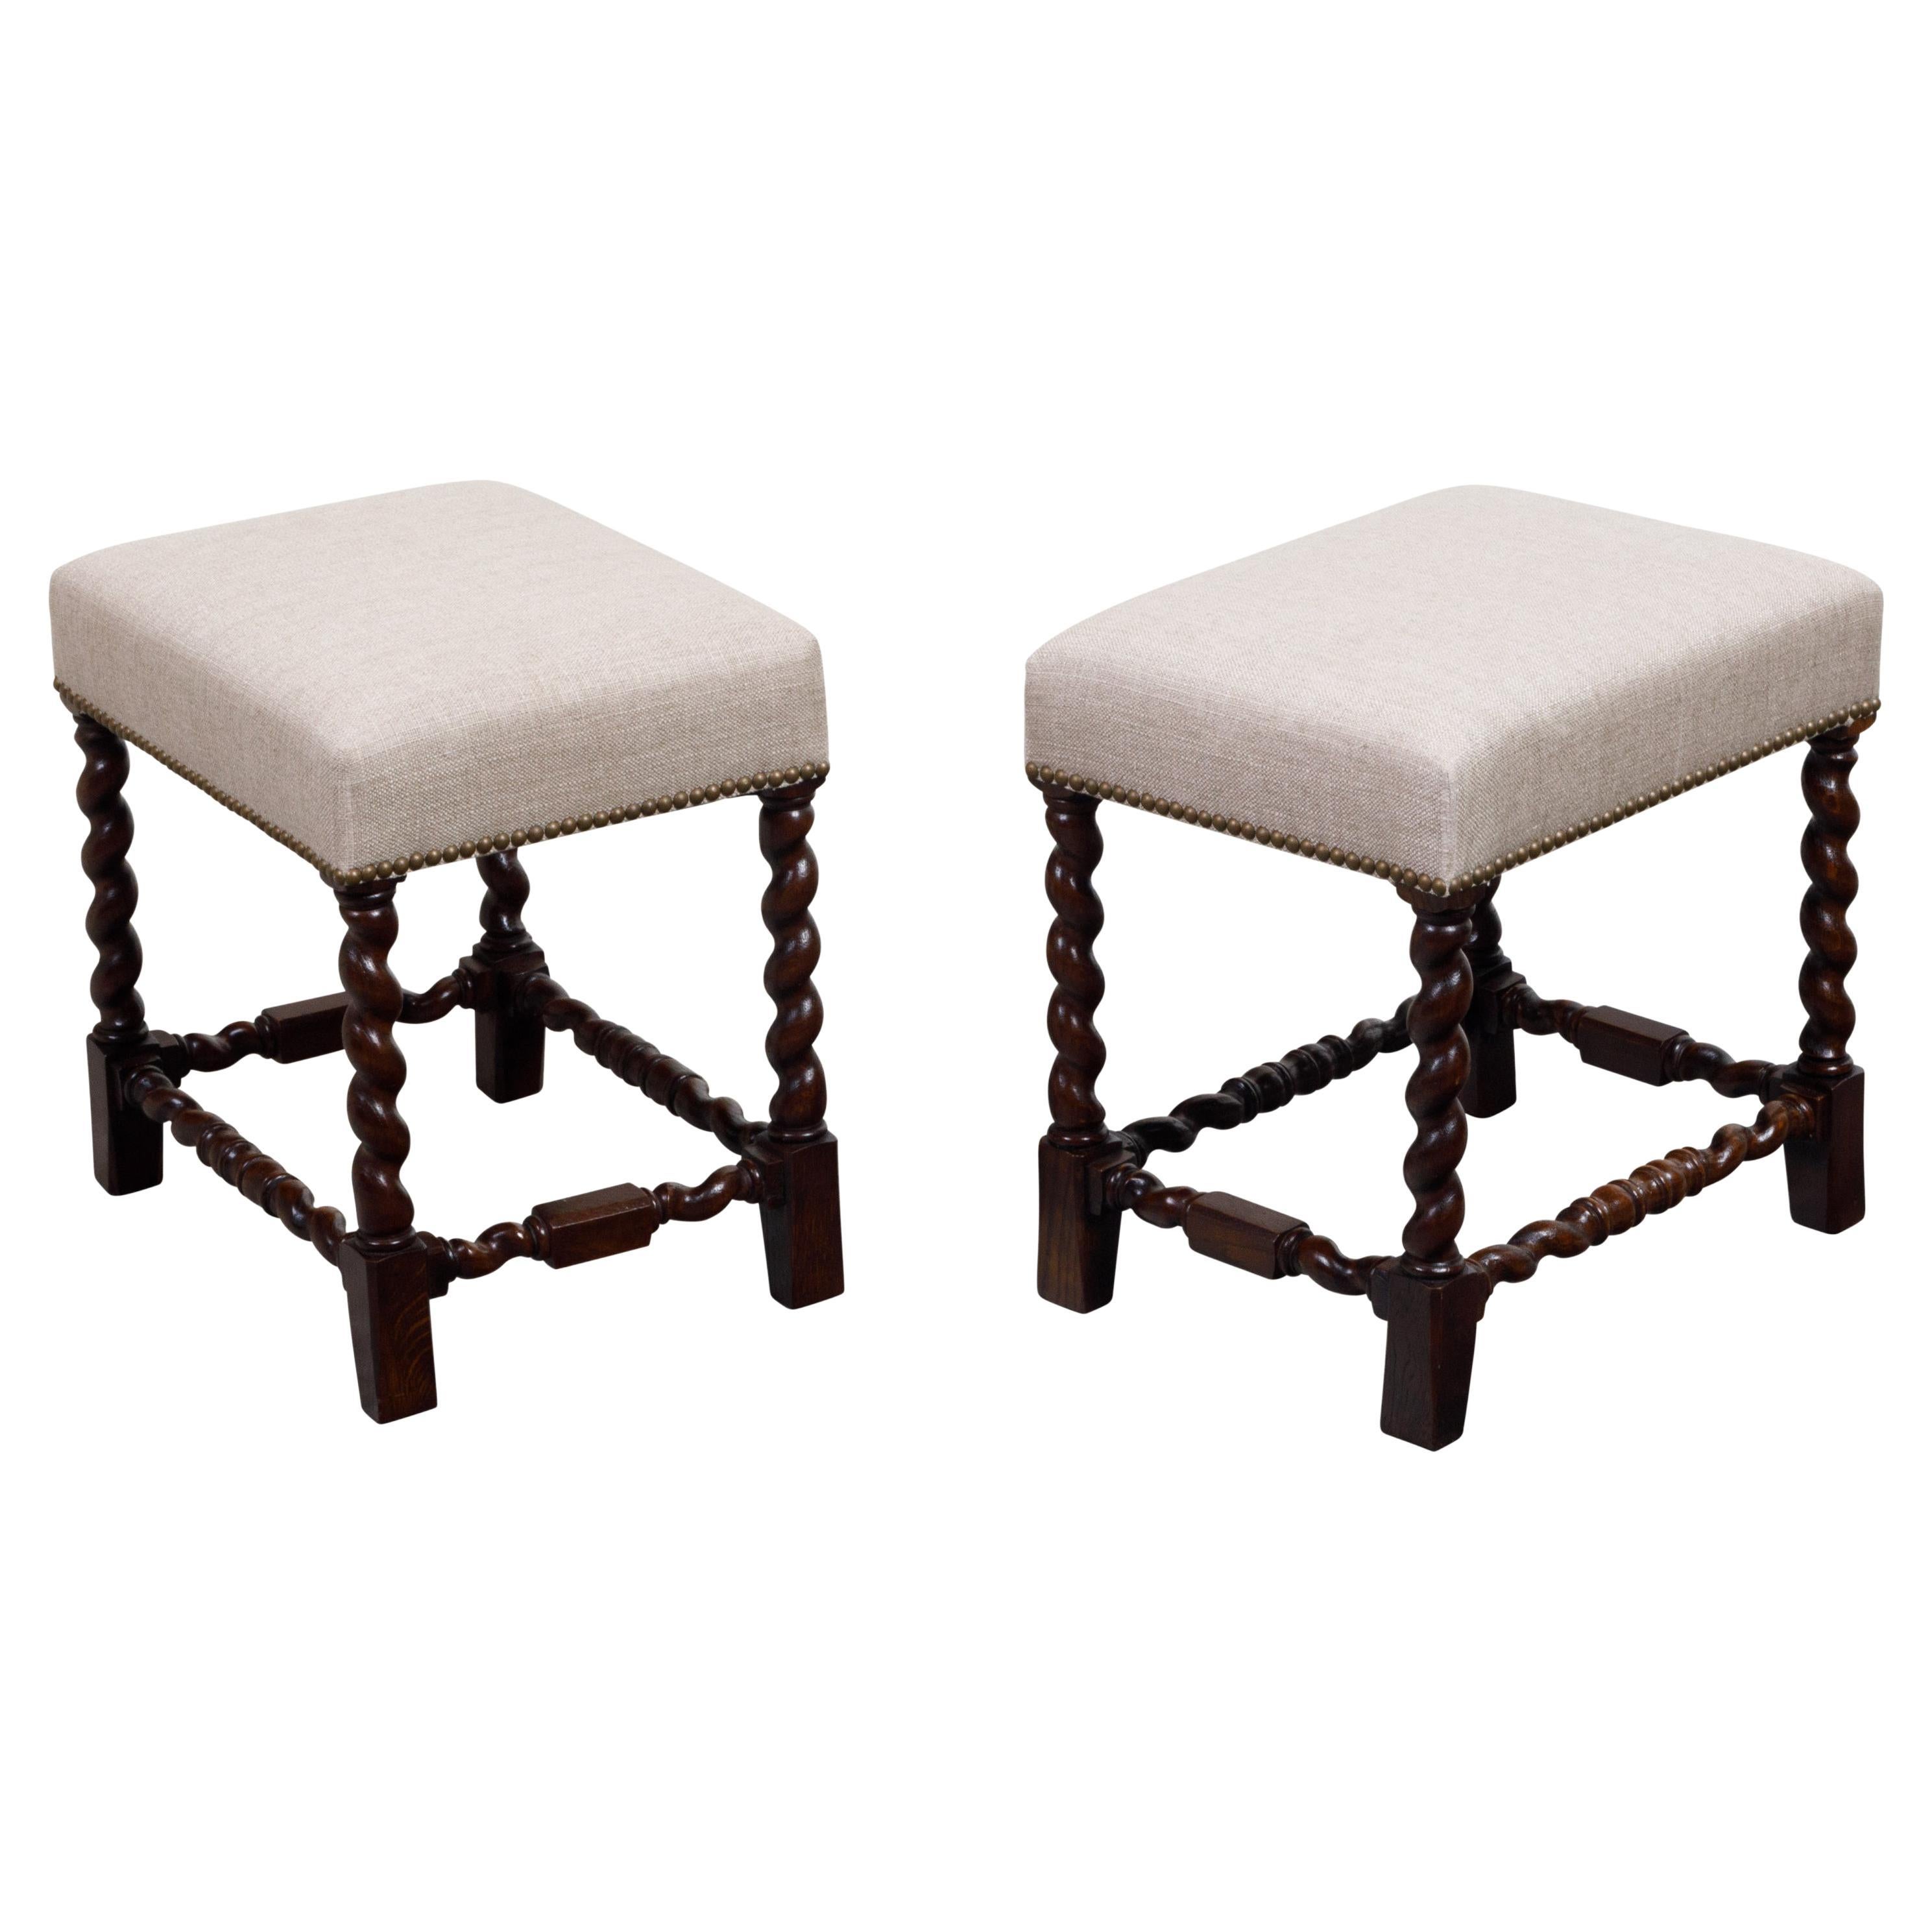 Pair of English 1900s Barley Twist Oak Stools with Upholstered Seats